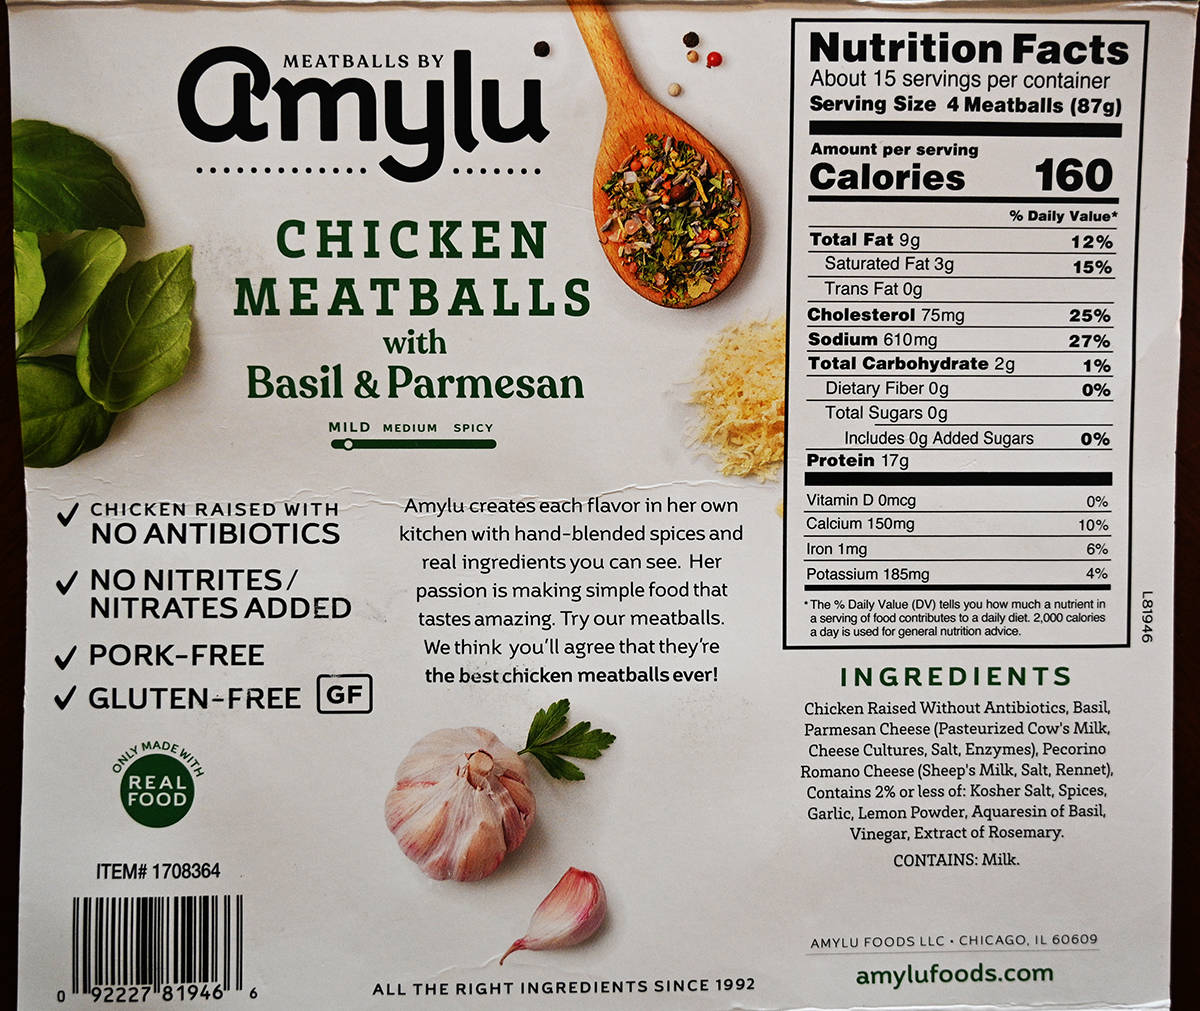 Image of the back of the box for the meatballs showing nutrition facts, ingredients and product description.